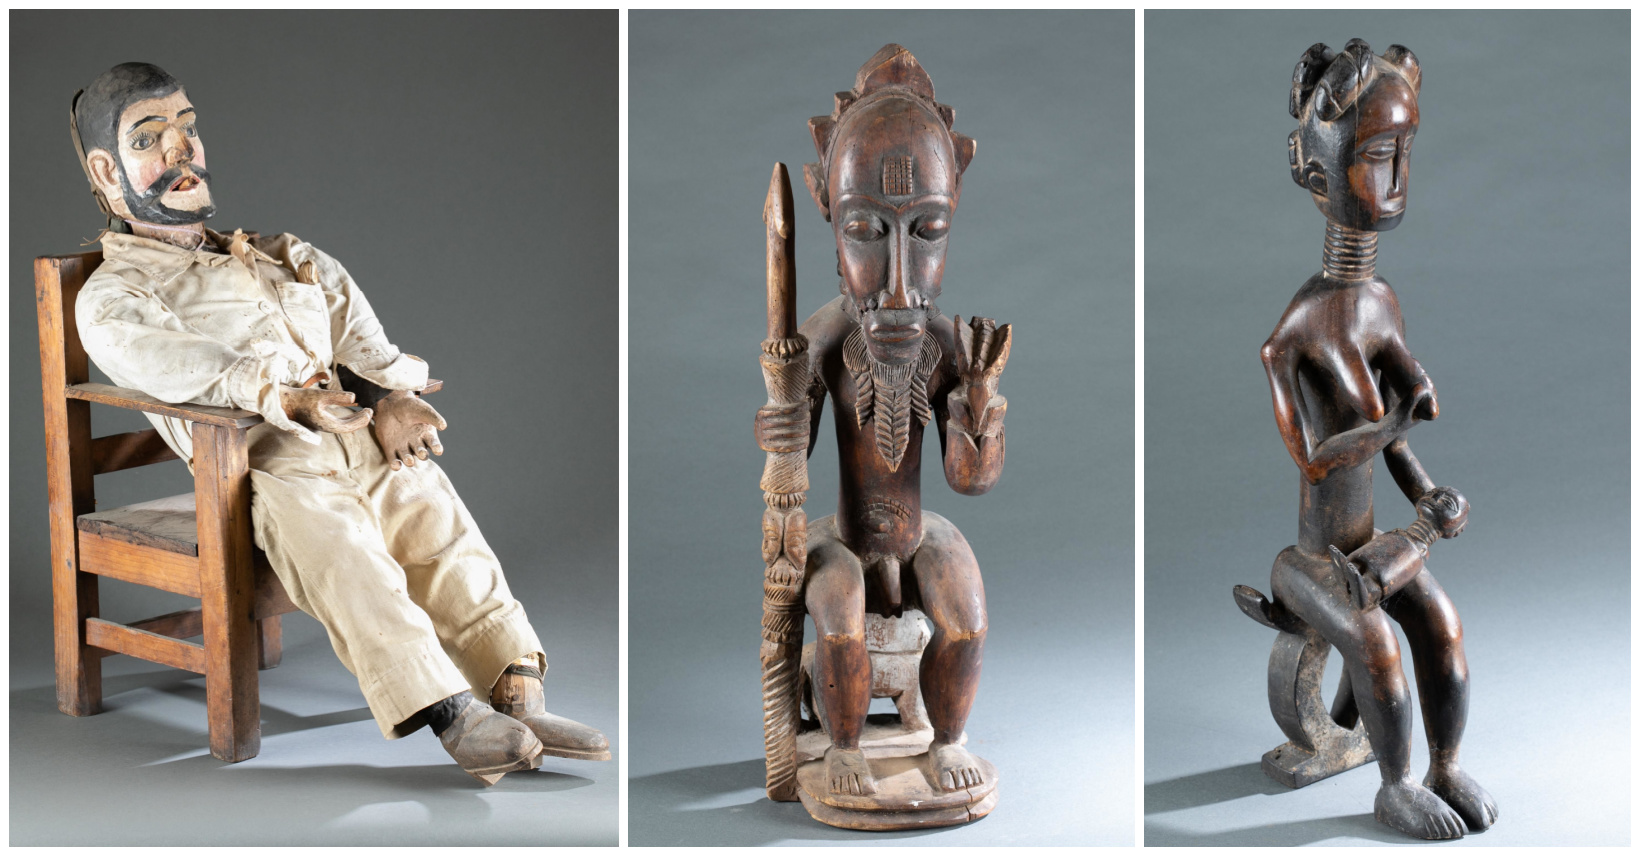 January 18th Q970 Doyle Family Trust's Ethnographic Collection Auction